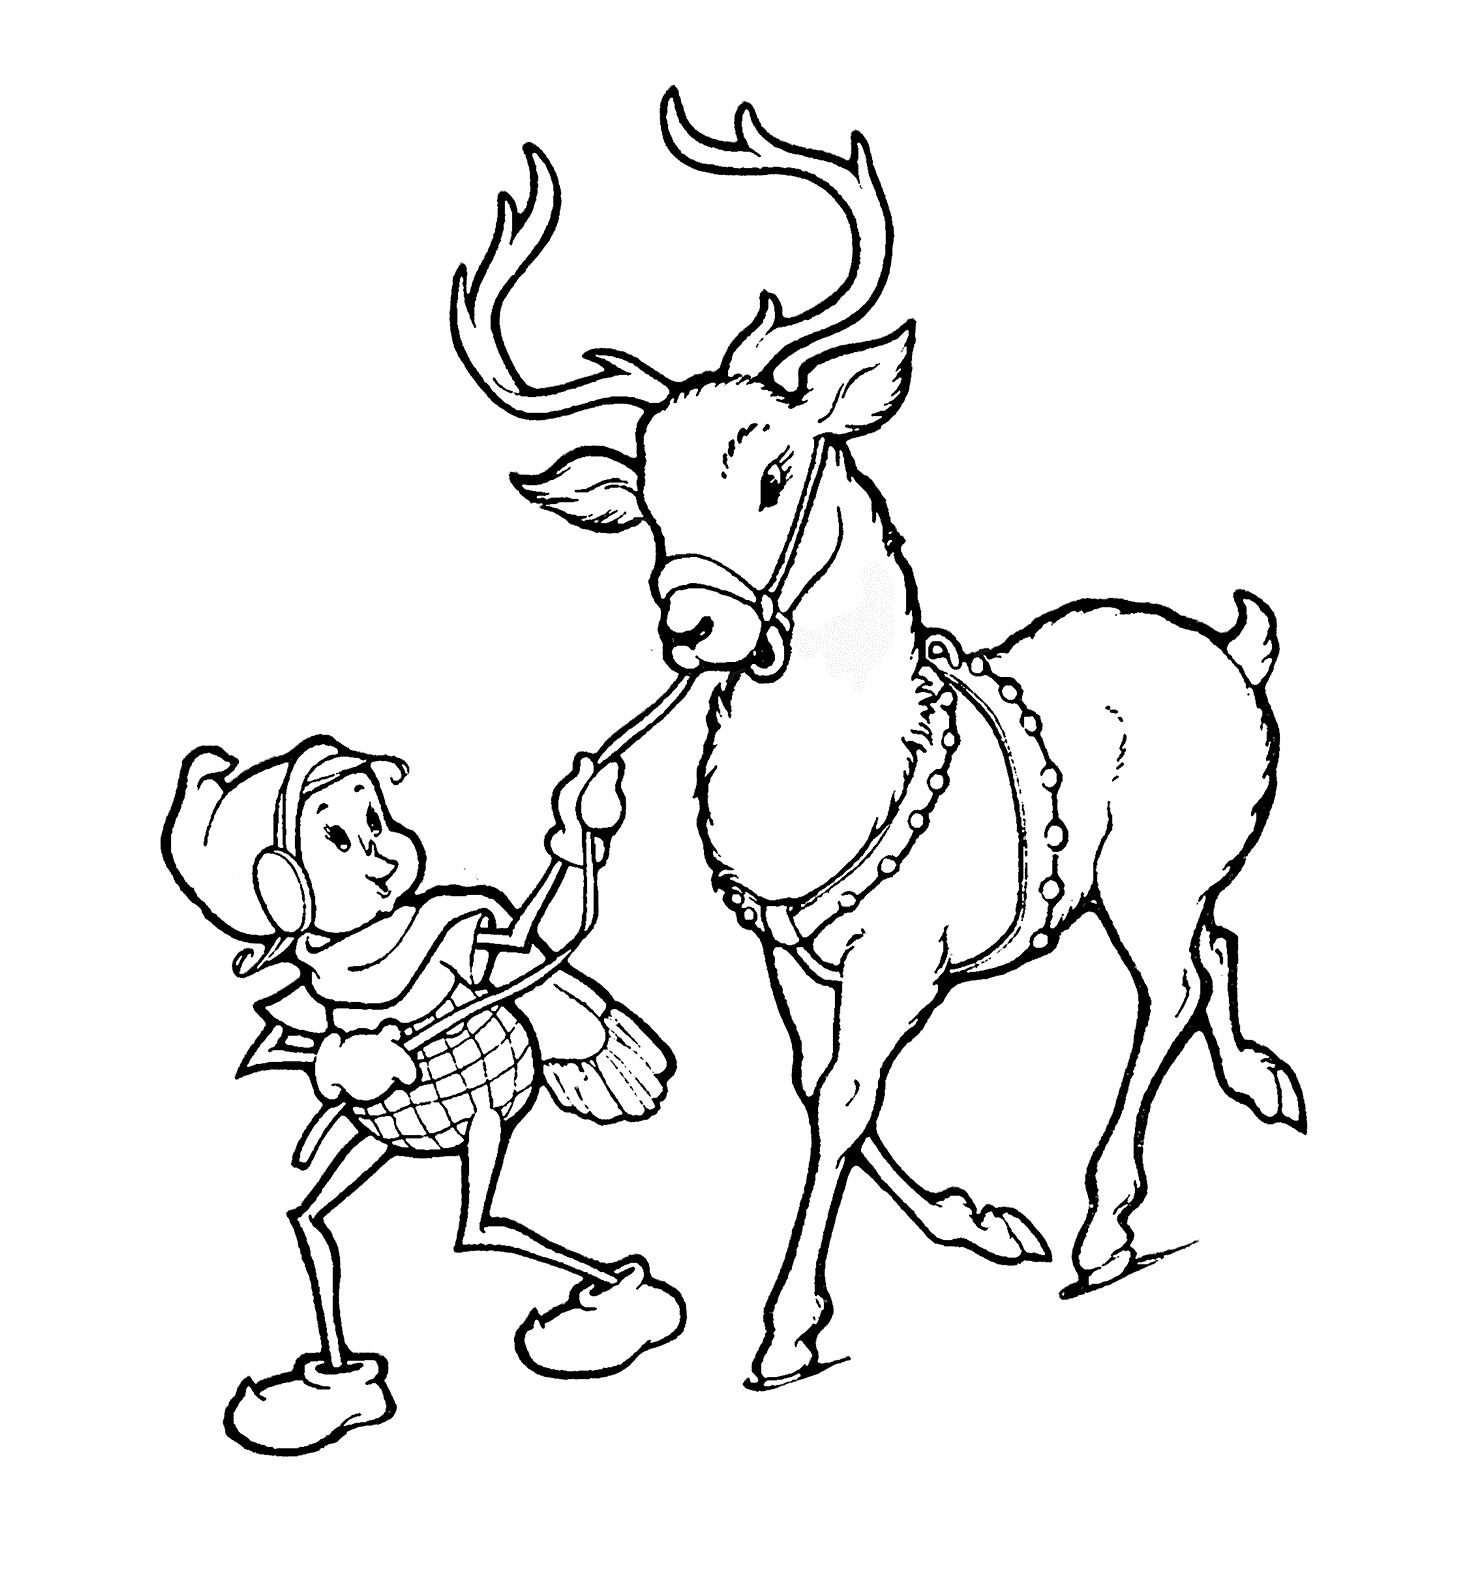 Elf And Reindeer Image For Kids Coloring Page